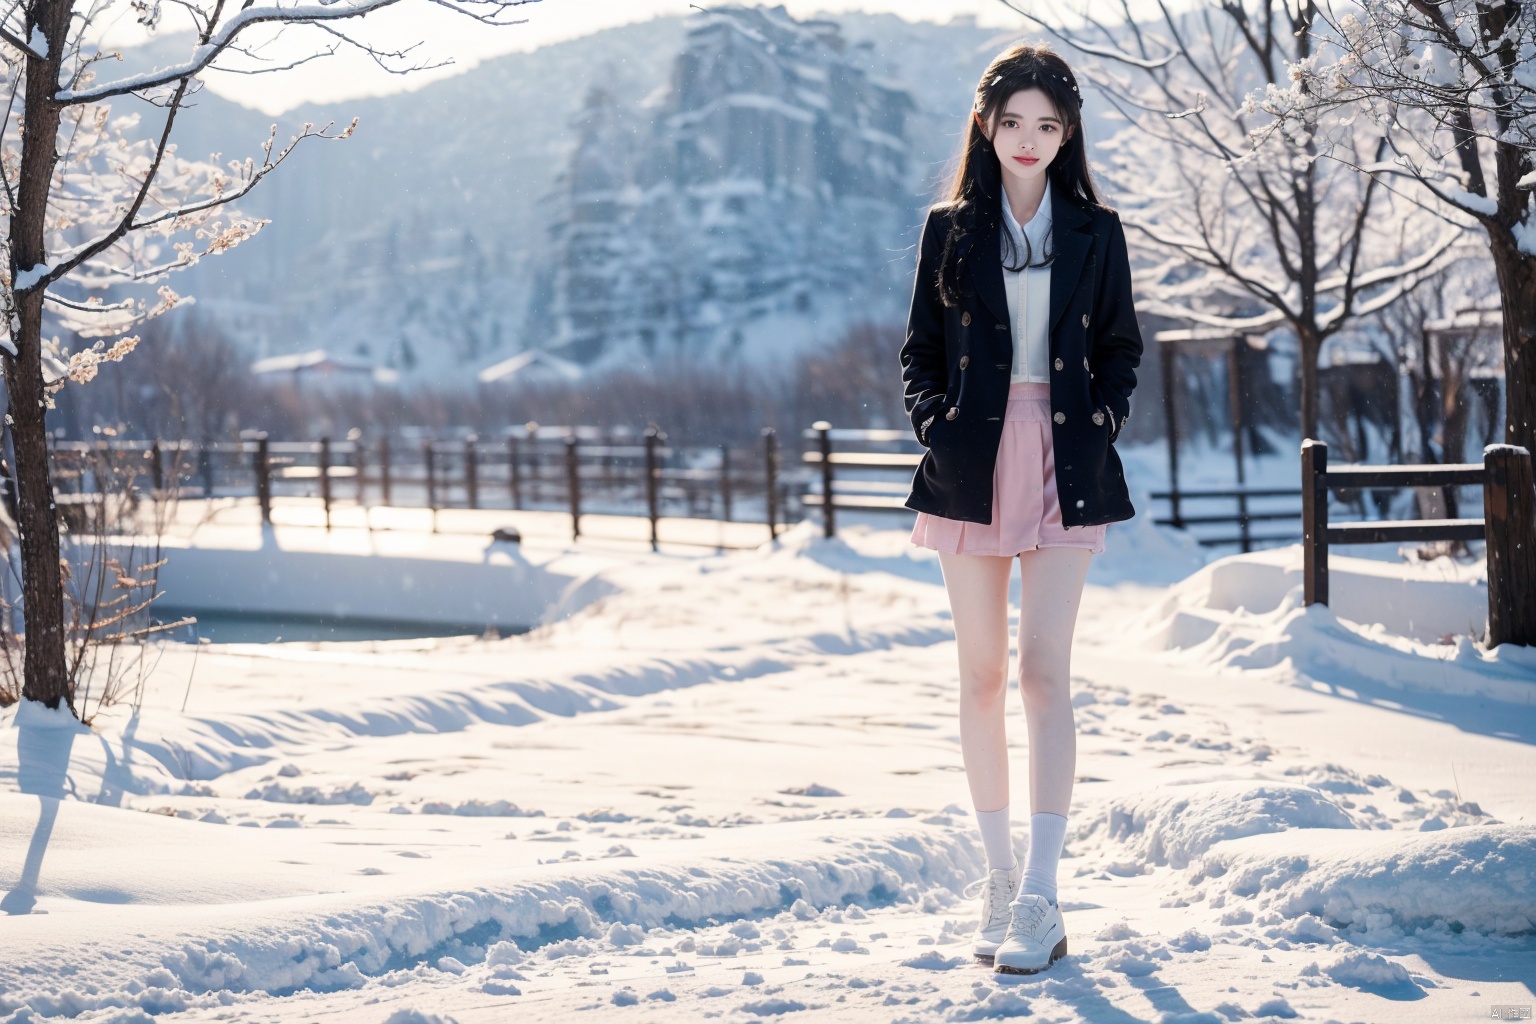  1 girl,Transparent skirt,pink face,stockings,(snow:1.2),(snowing:1.2),peach blossom,snow,solo,scarf,black hair,smile,long hair,bokeh,realistic,long coat,blurry, captivating gaze, embellished clothing, natural light, shallow depth of field, romantic setting, dreamy pastel color palette, whimsical details, captured on film,. (Original Photo, Best Quality), (Realistic, Photorealistic: 1.3), Clean, Masterpiece, Fine Detail, Masterpiece, Ultra Detailed, High Resolution, (Best Illustration), (Best Shadows), Complex, Bright light, modern clothing, (pastoral: 1.3), smiling,standing,(very very short skirt:1.5),knee socks,(white shoes: 1.4),long legs, forest, grassland,(view: 1.3), 21yo girl, striped, capricornus, 1girl, light master, jujingyi